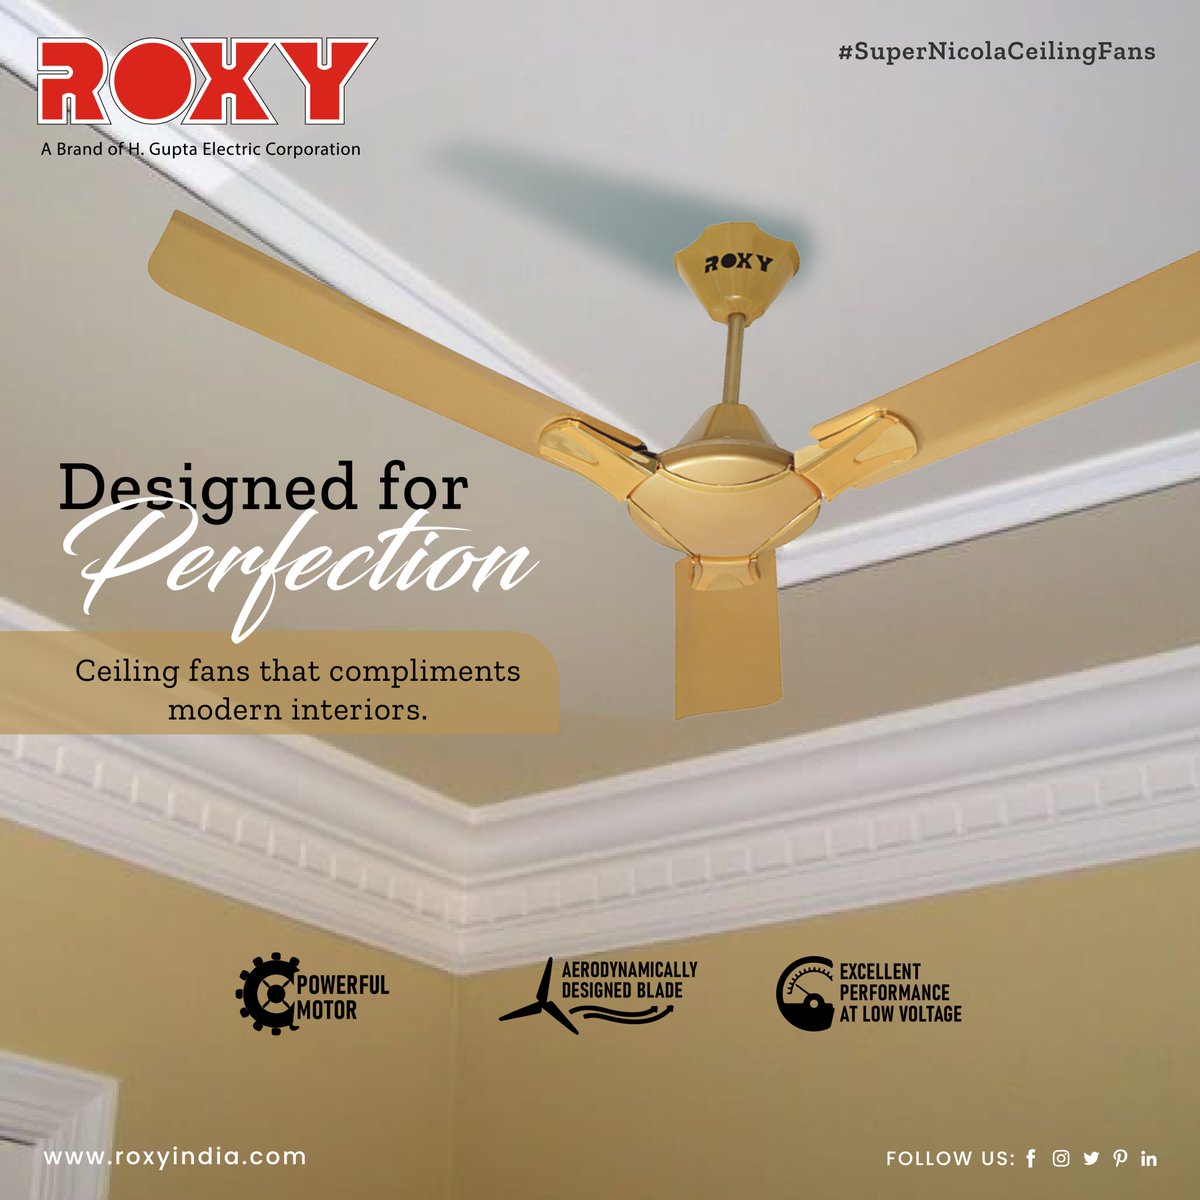 The stylish ceiling fans not only provide cooling and energy efficiency but also enhance the aesthetics of your home.

For more information visit: roxyindia.com

#nicolafan #celingfan #roxy #roxyappliances #kitchenhood #kitchendesign #interiordesign #kitchen